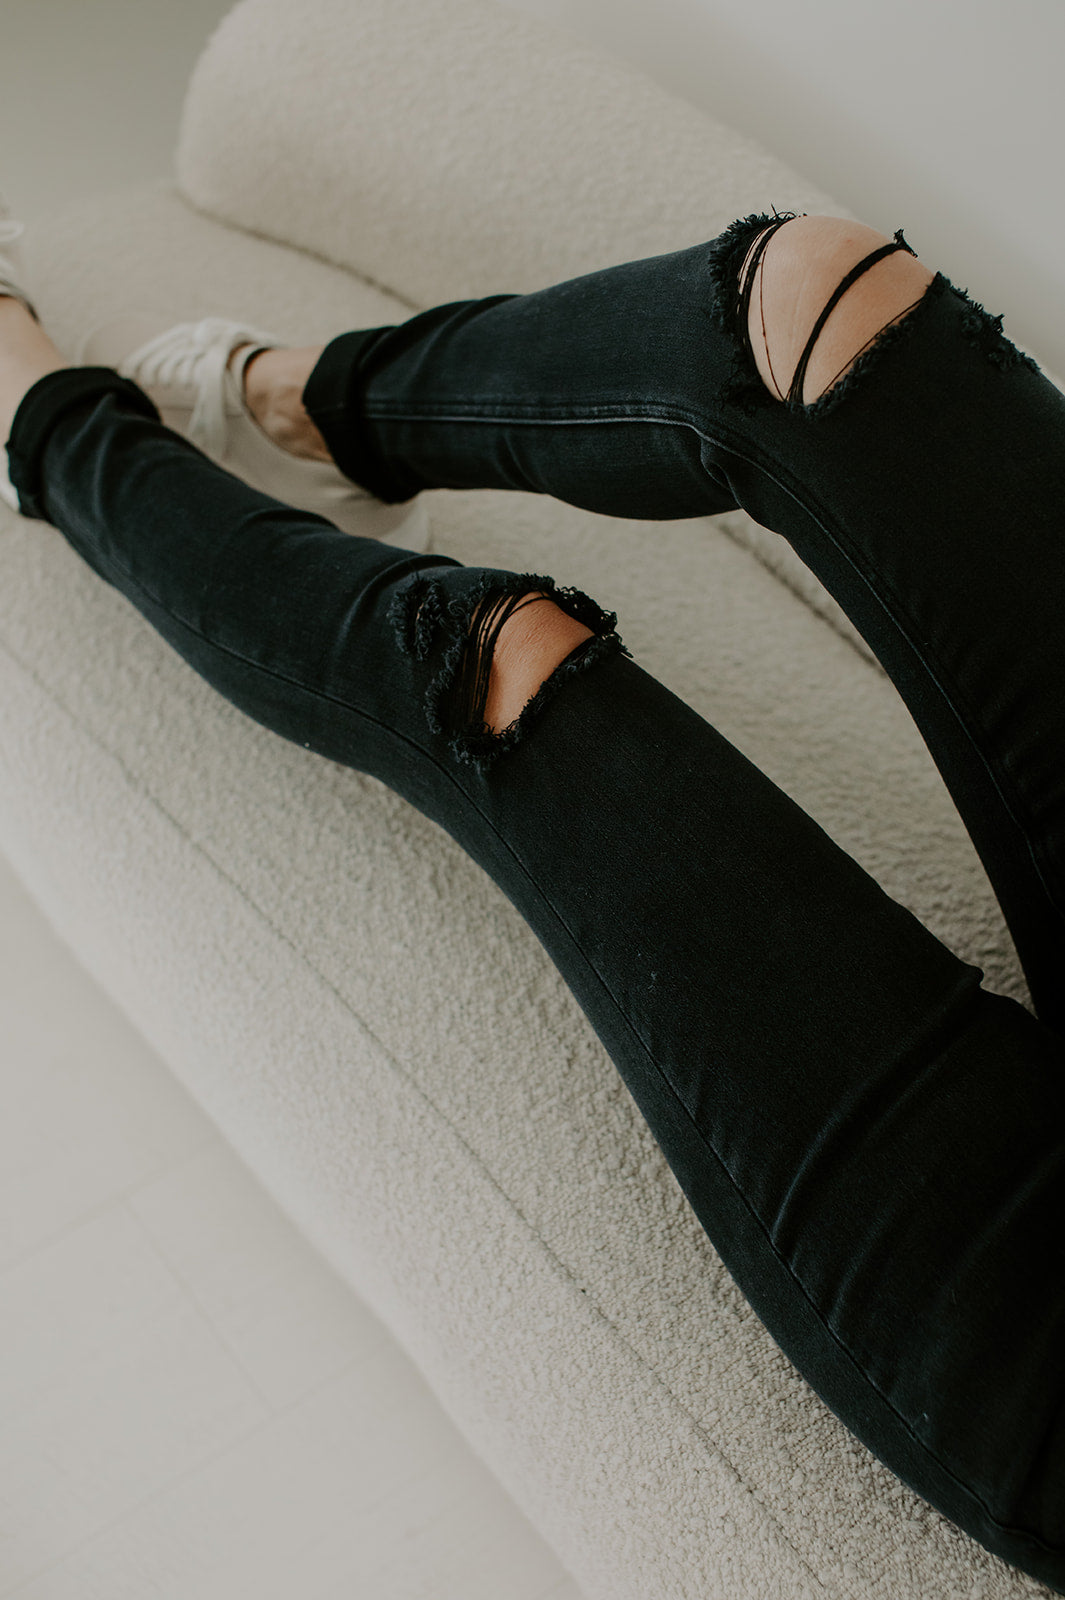 diy ripped jeans tumblr